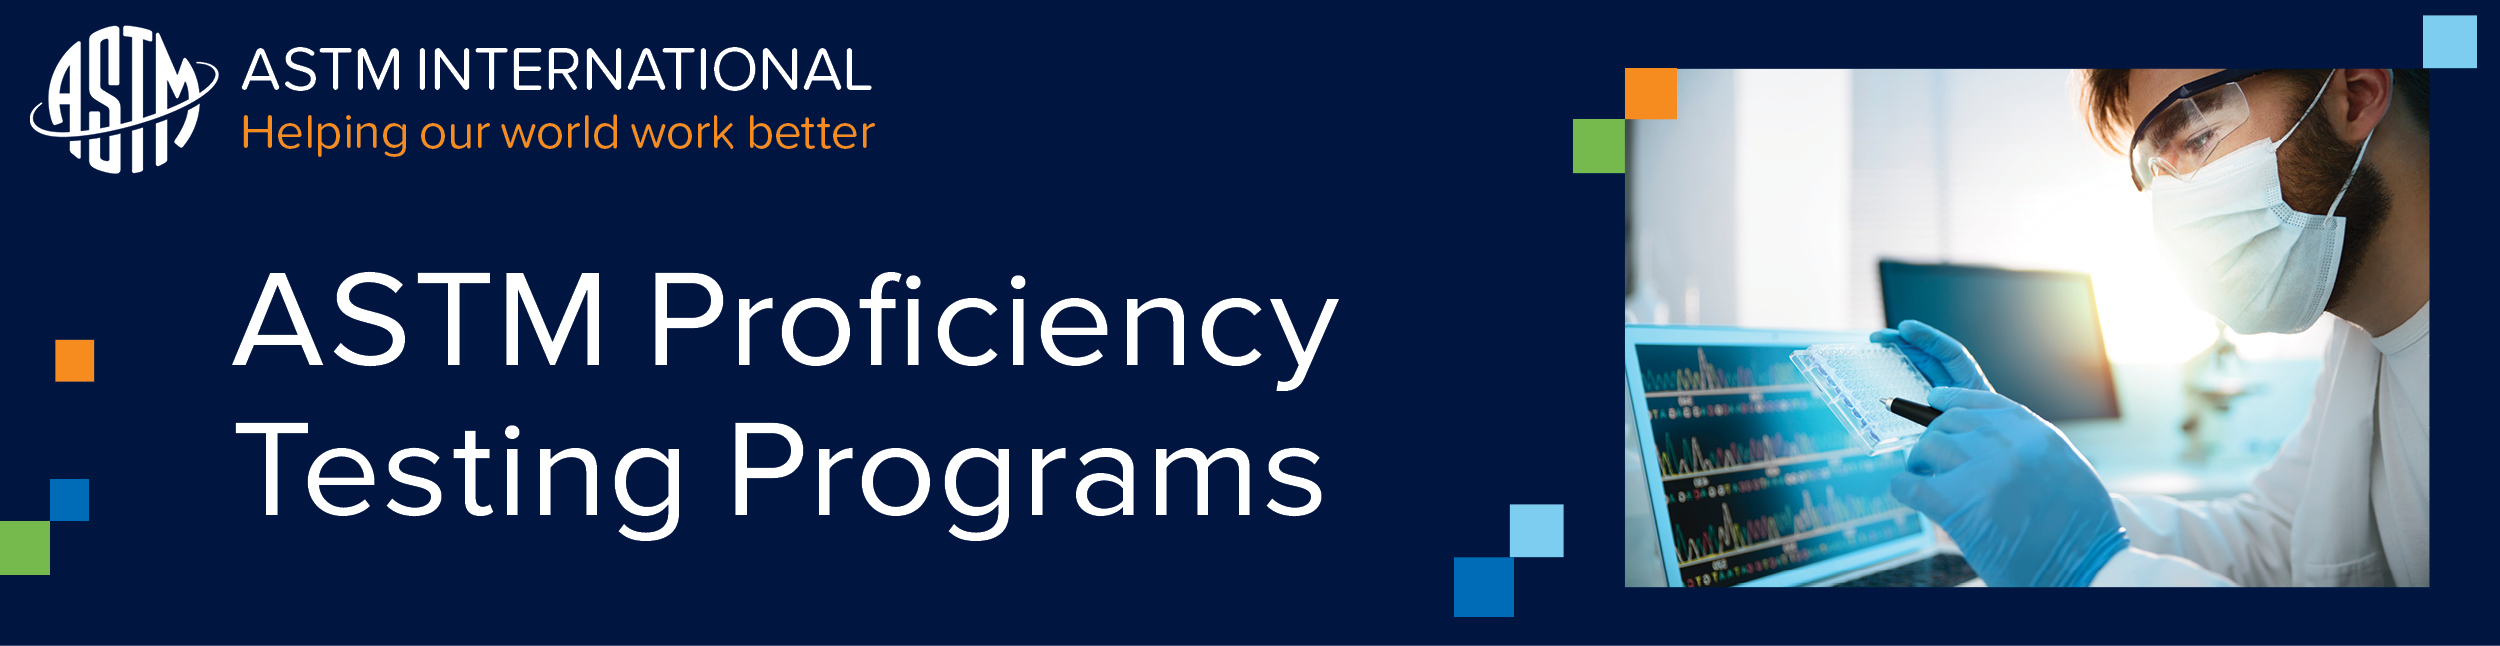 Learn More About ASTM Proficiency Testing Programs 